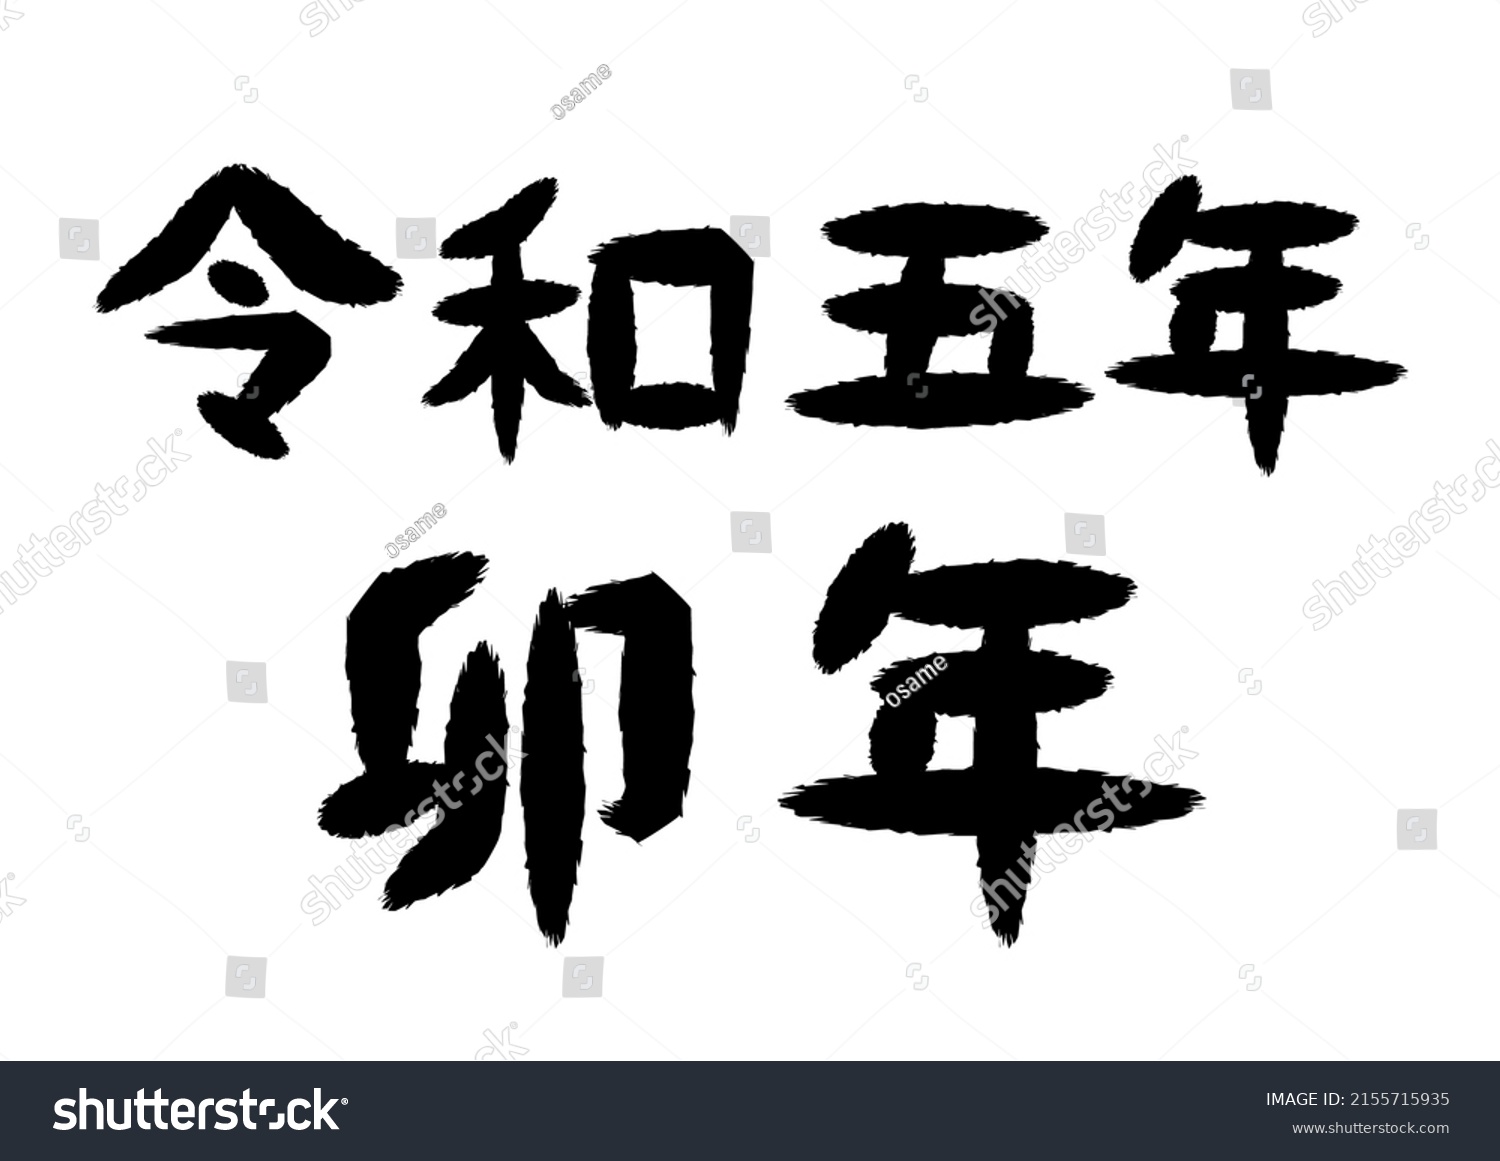 black-text-japanese-5th-year-reiwa-stock-vector-royalty-free-2155715935-shutterstock